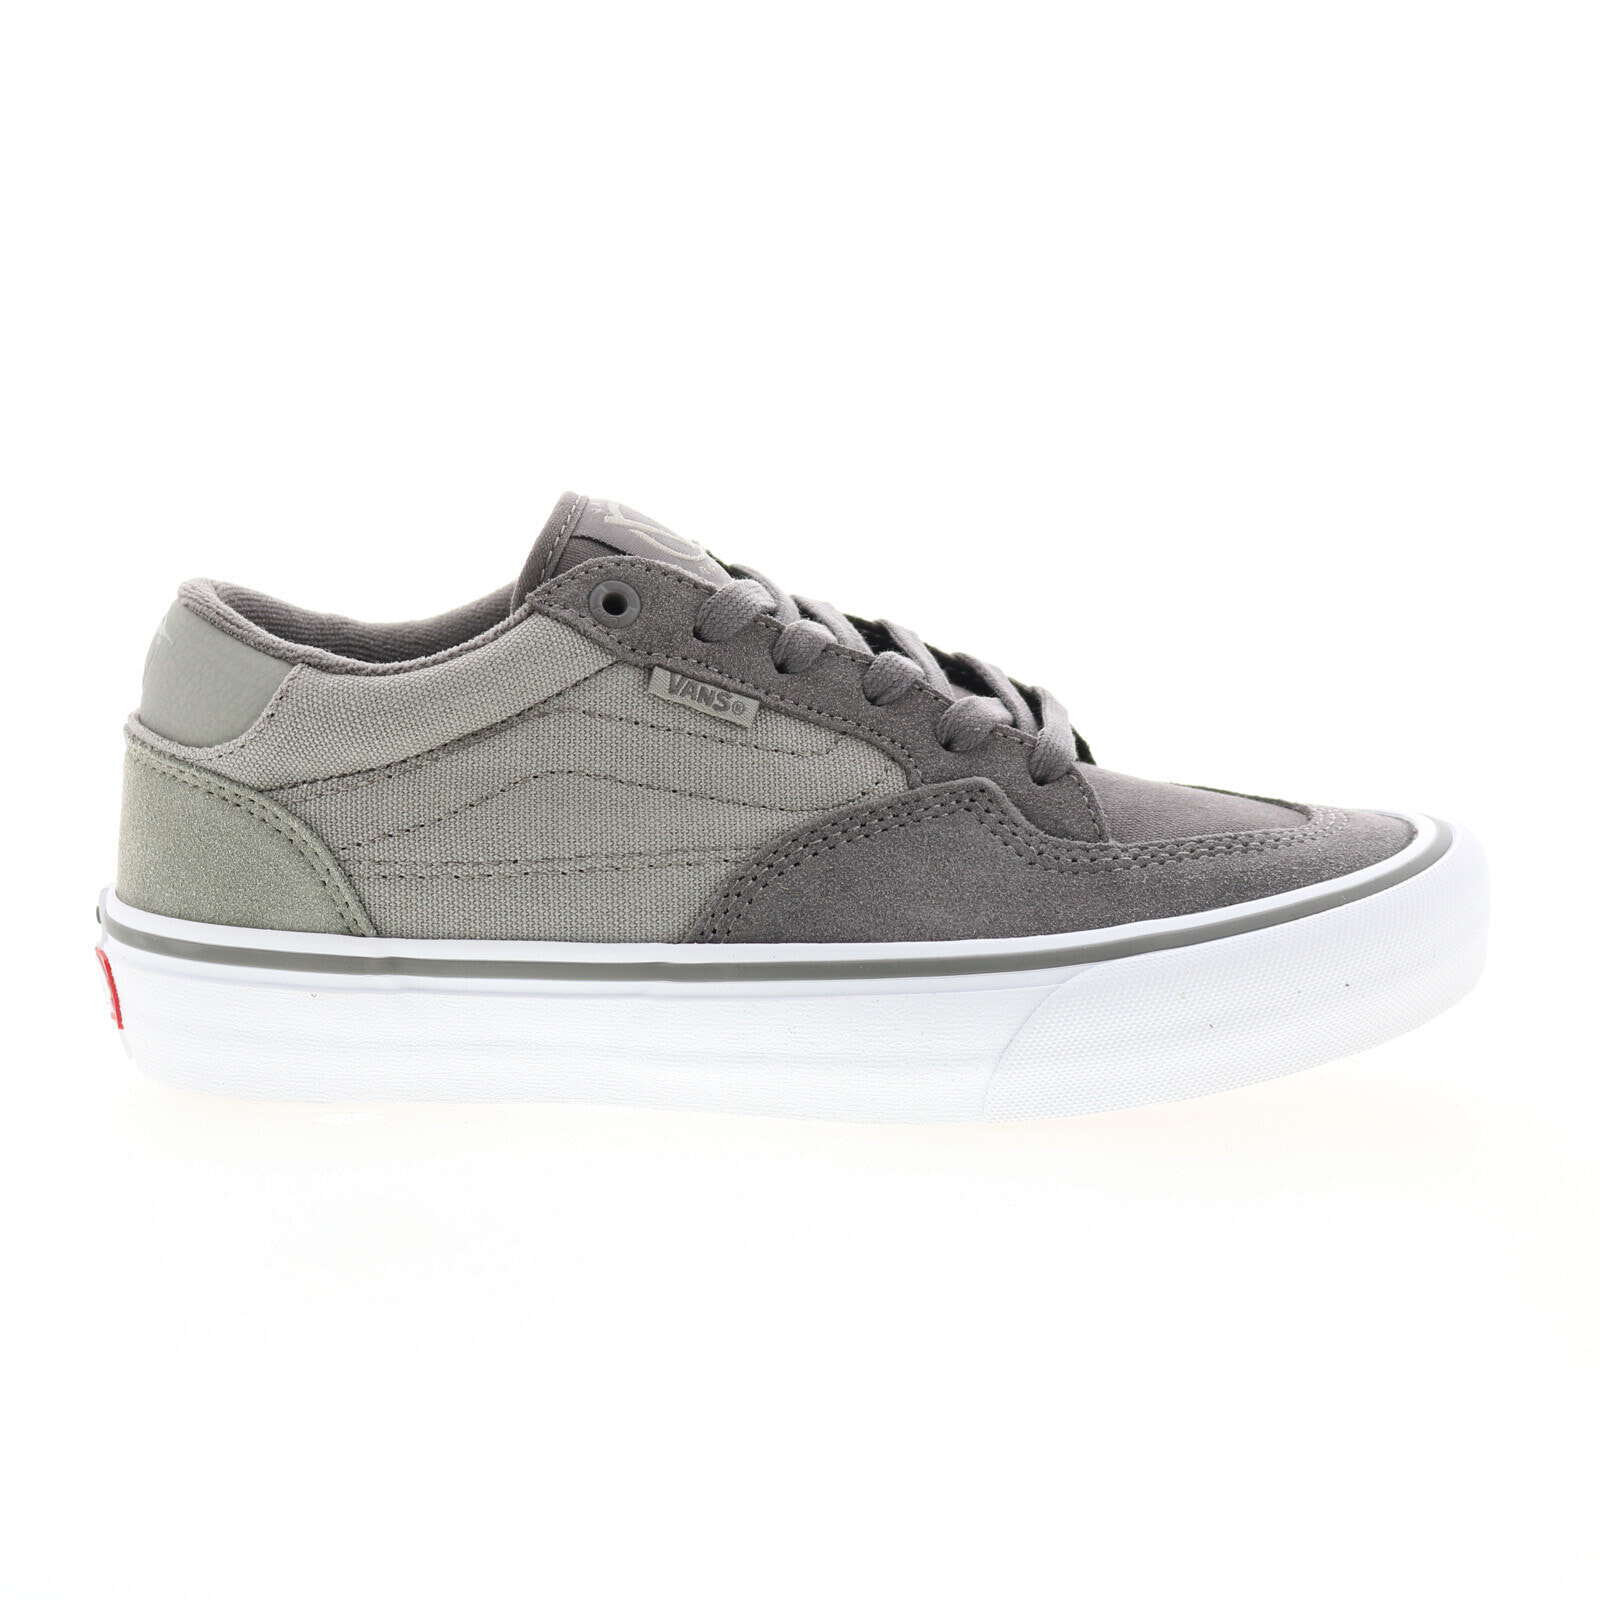 Vans Rowan Pro VN0A5HEV38Z Mens Gray Suede Lace Up Lifestyle Sneakers Shoes